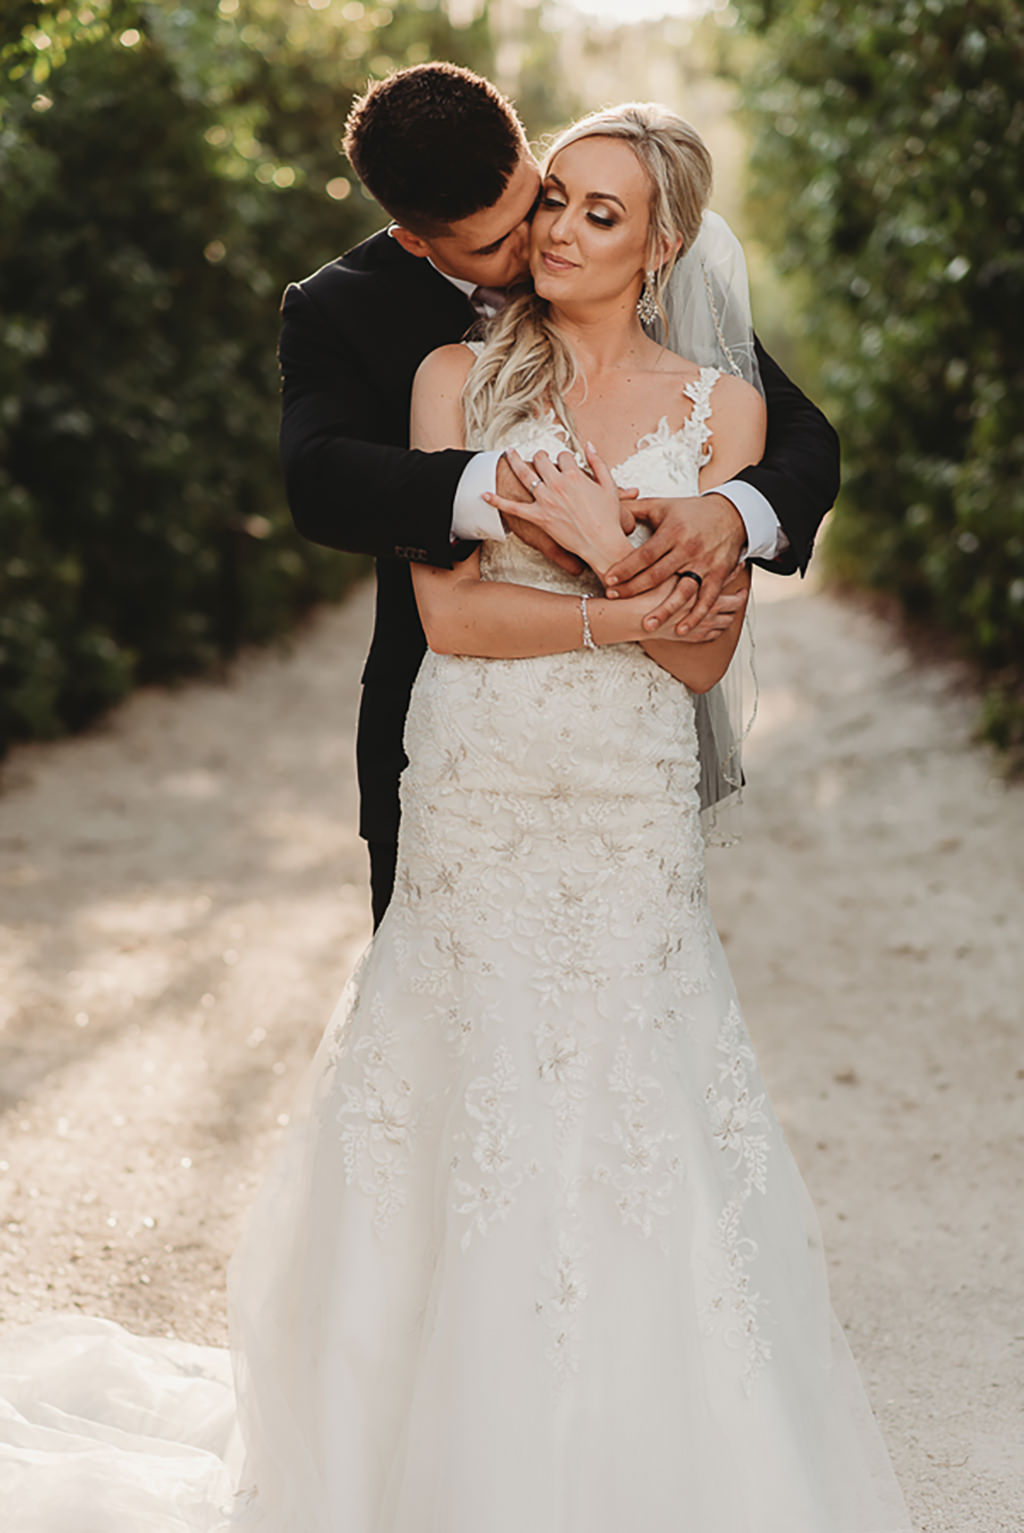 Bride and Groom Outdoor Garden Wedding Portrait, Bride in Fit and Flare, Floral Lace Embellished and Rhinestone V Neck Wedding Dress with Straps and Veil | Tampa Bay Bridal Wedding Dresses Truly Forever Bridal | Sarasota Wedding Venue Historic Spanish Point